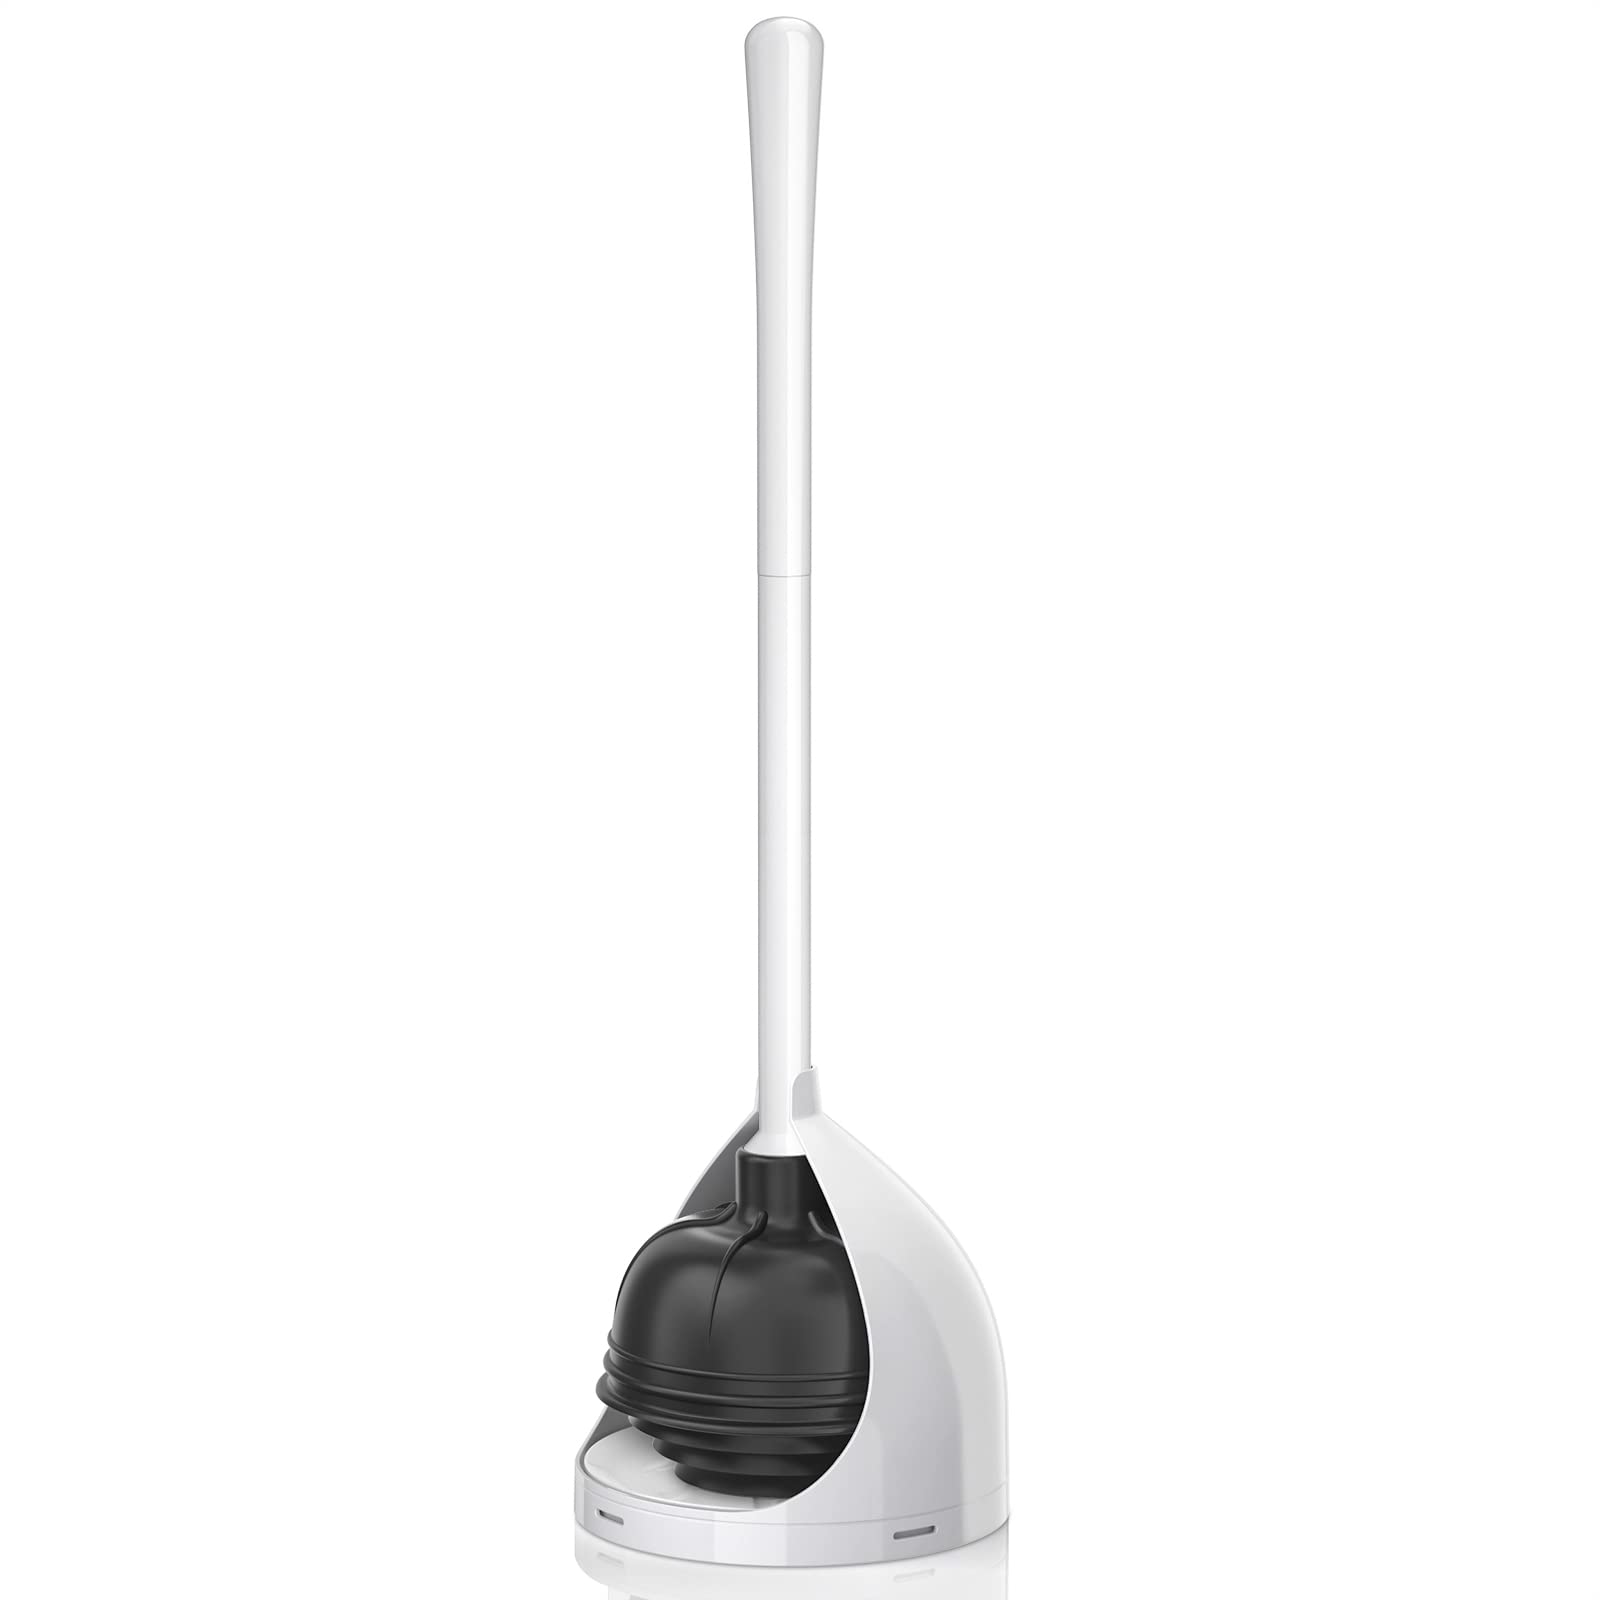 uptronic Toilet Plunger with Holder, Unique Plunger with All-Angle